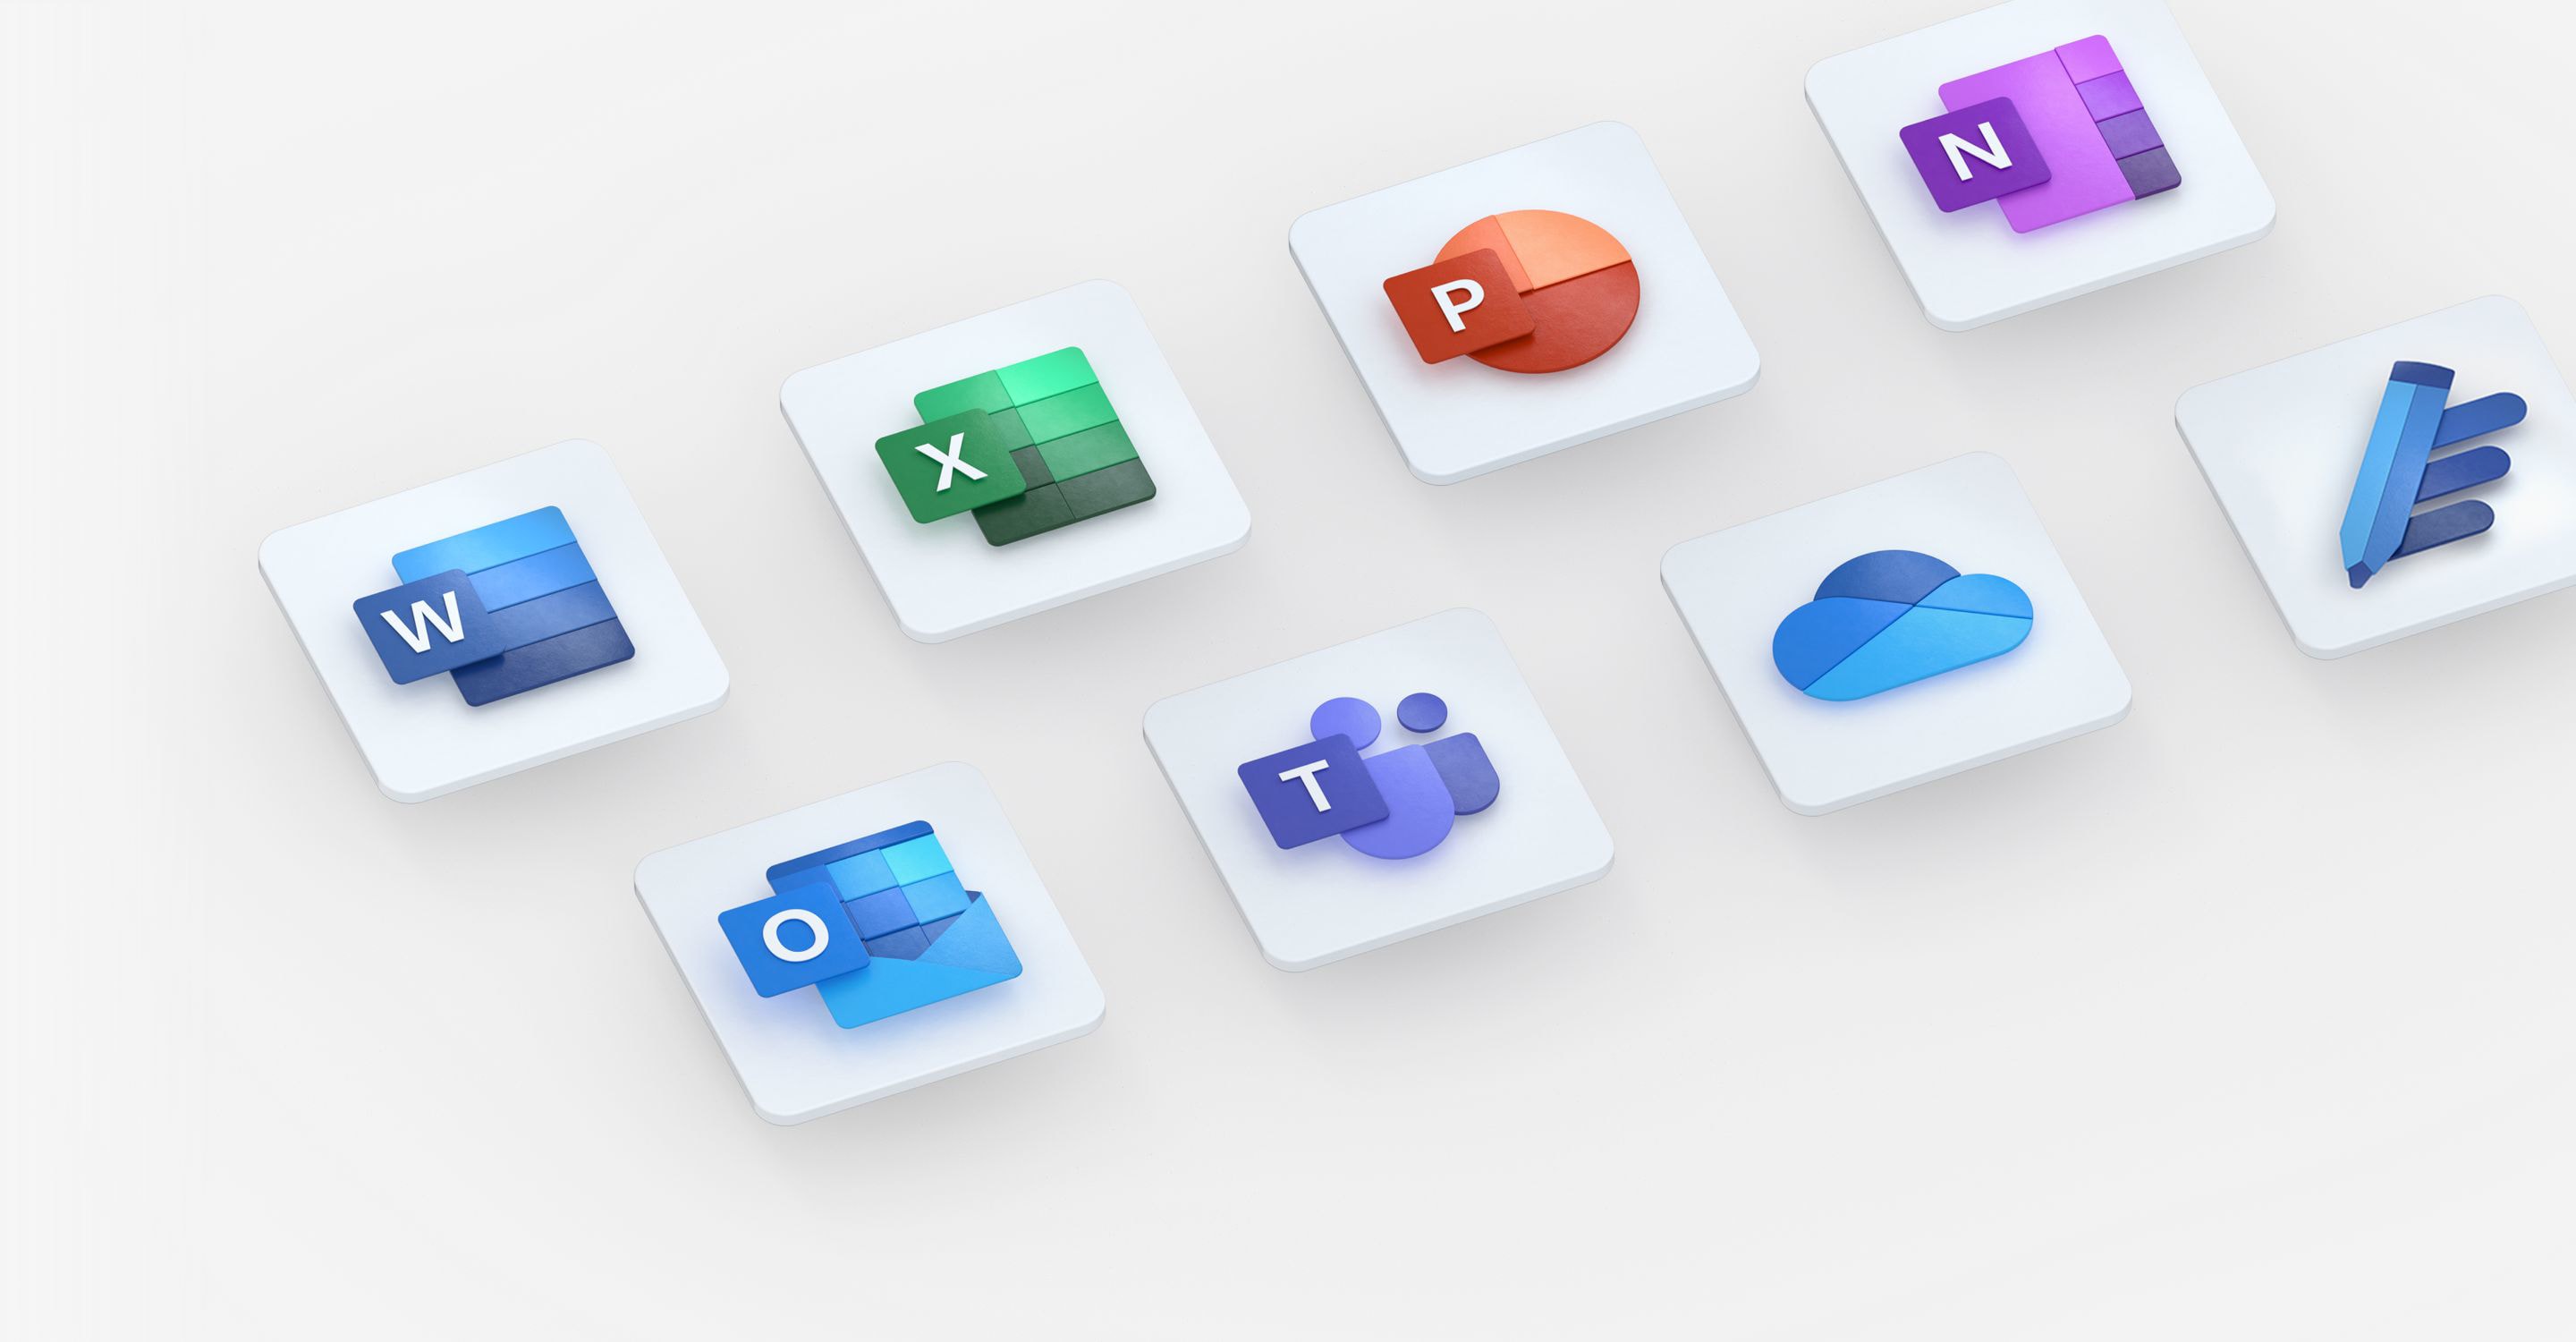 Icons from Microsoft 365 apps such as Word, Excel, PowerPoint, OneNote, Outlook, Teams, OneDrive and Editor.